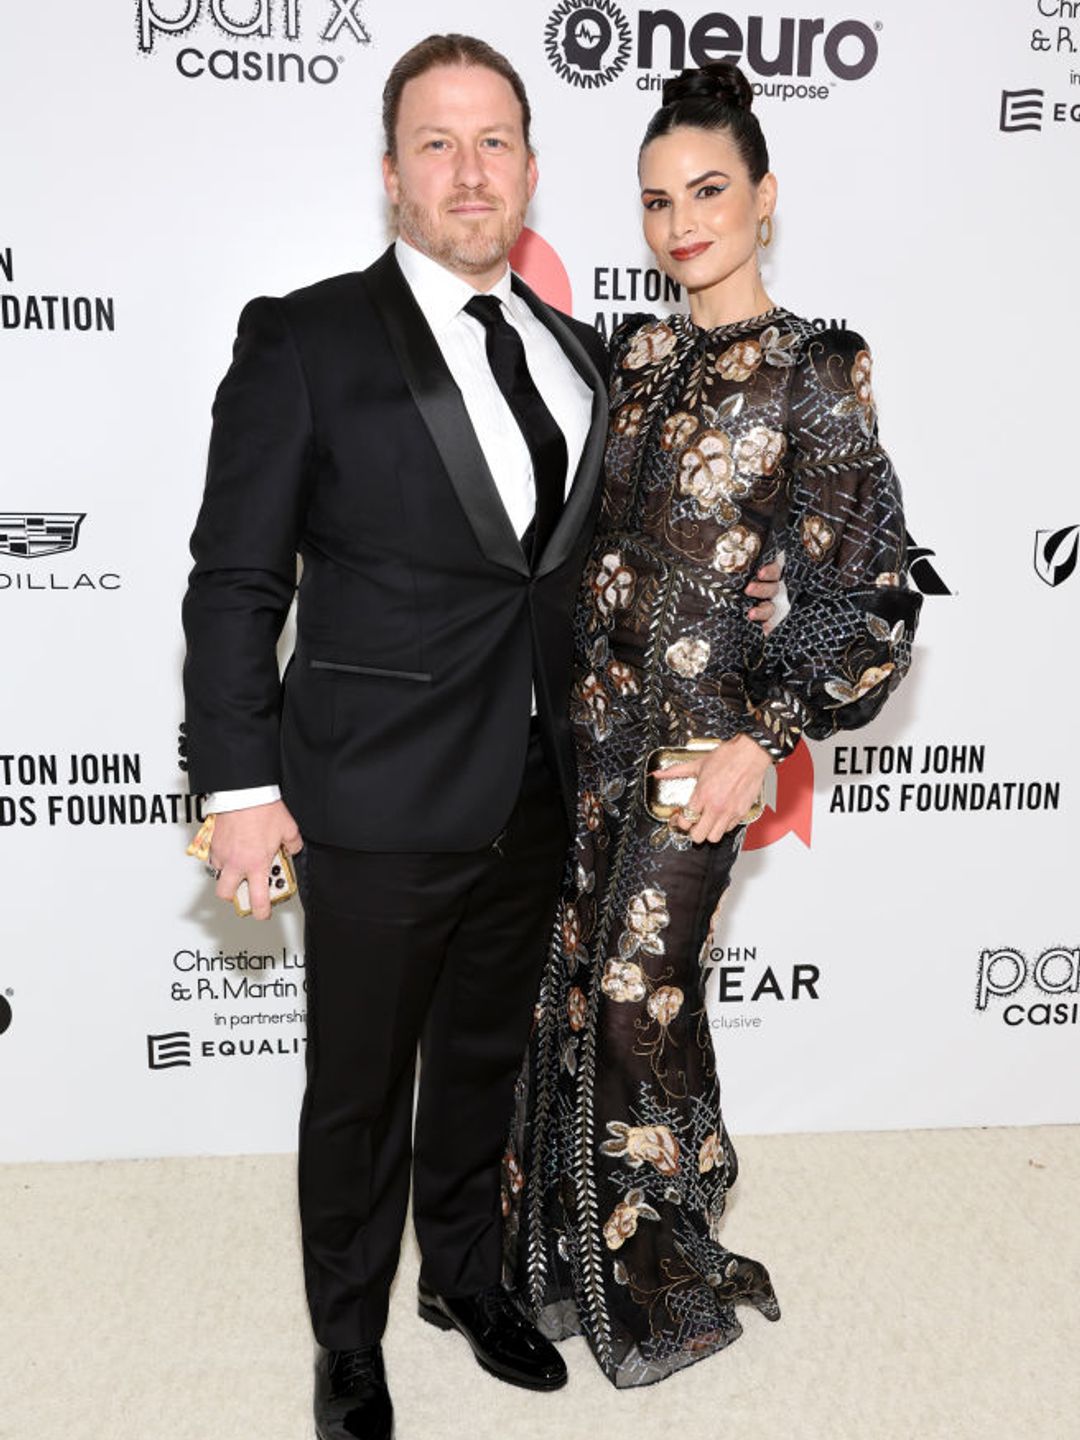 Keith Andreen and Katrina Law attend the Elton John AIDS Foundation's 30th Annual Academy Awards Viewing Party on March 27, 2022 